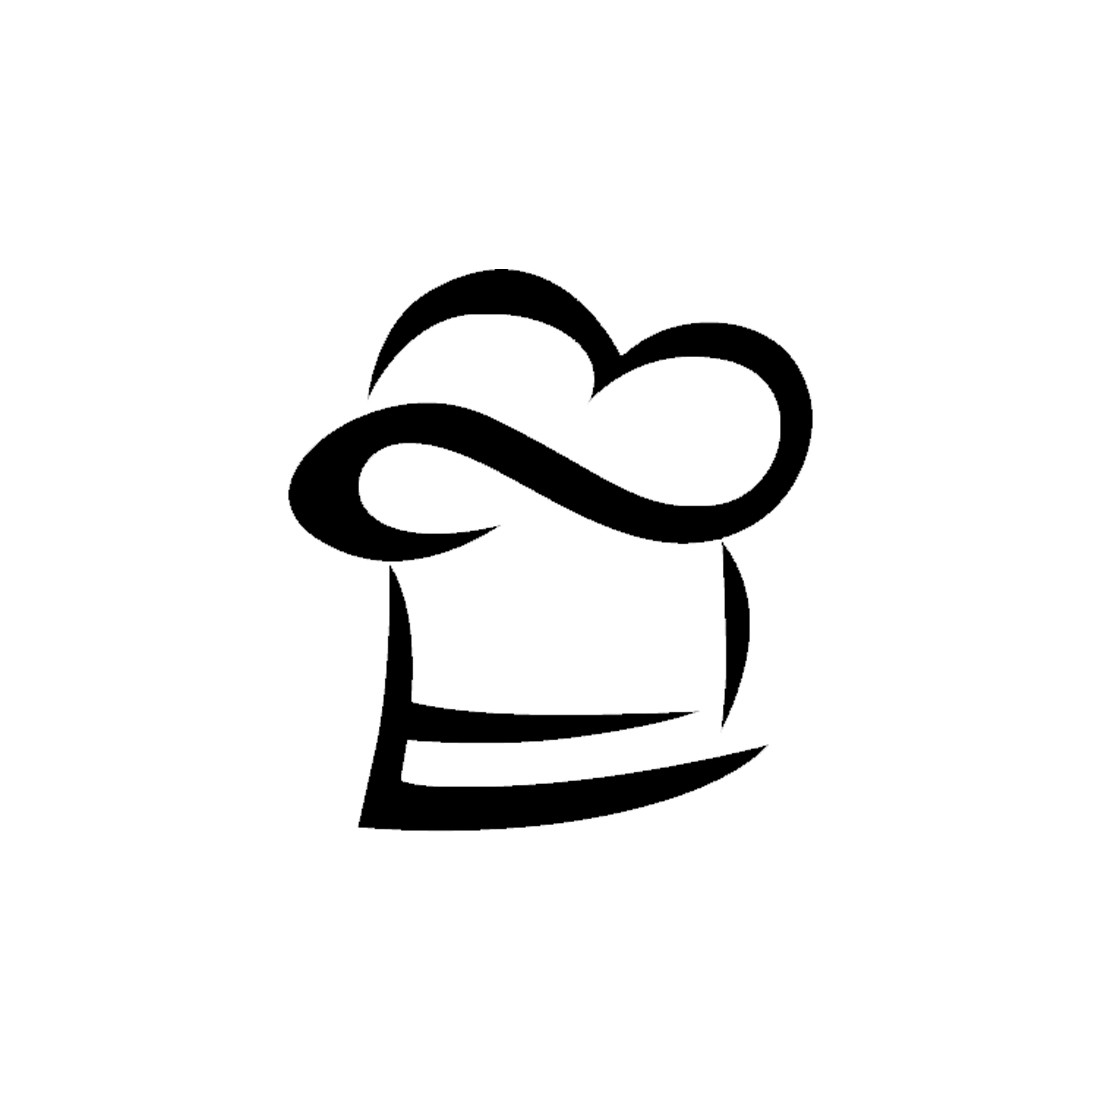 Black and white logo of a chef's hat.